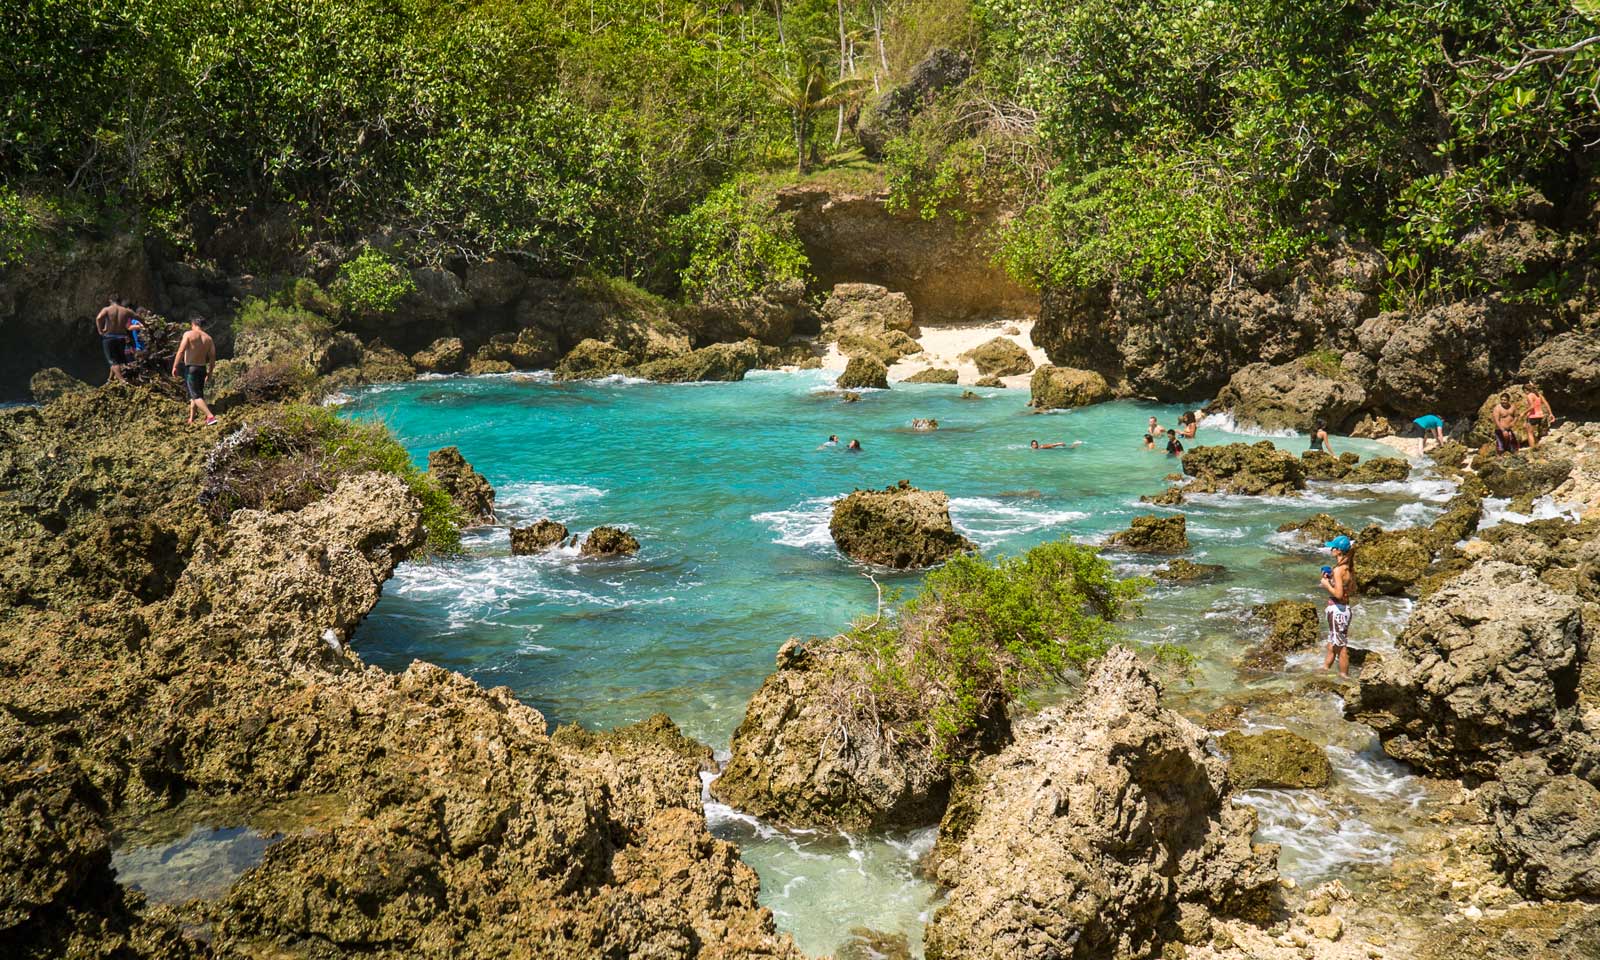  Hiking Spots to Check Out on Guam